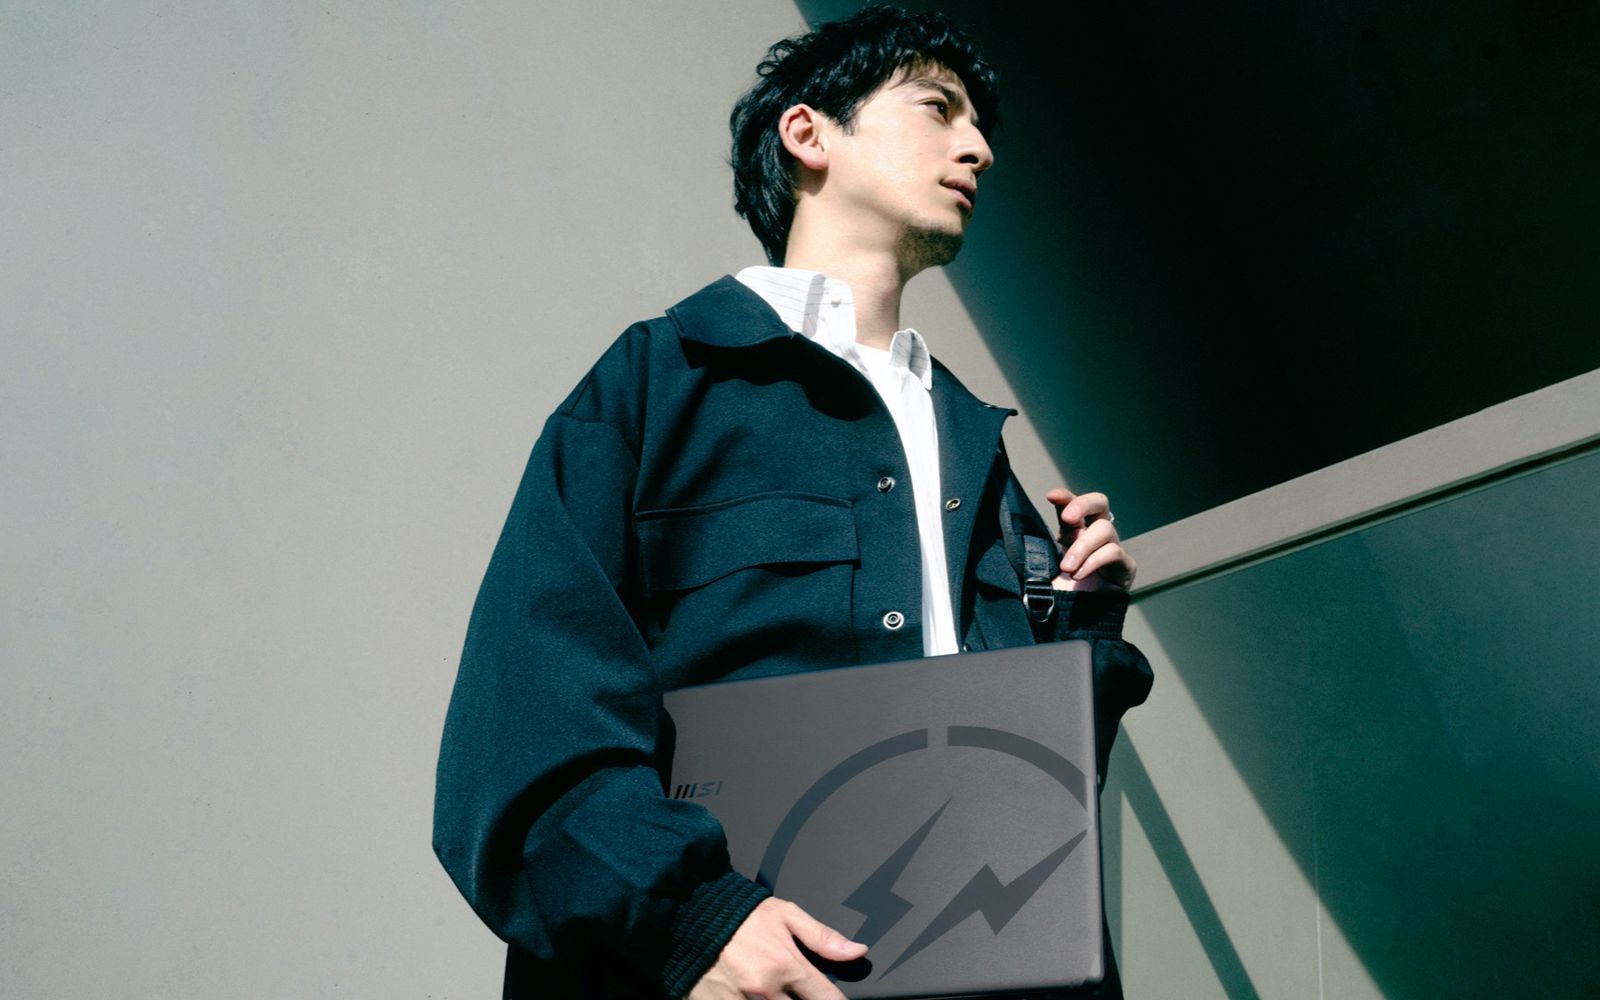 The streetwear laptop by Hiroshi Fujiwara and MSI The Japanese designer signs a laptop that combines technology and streetwear